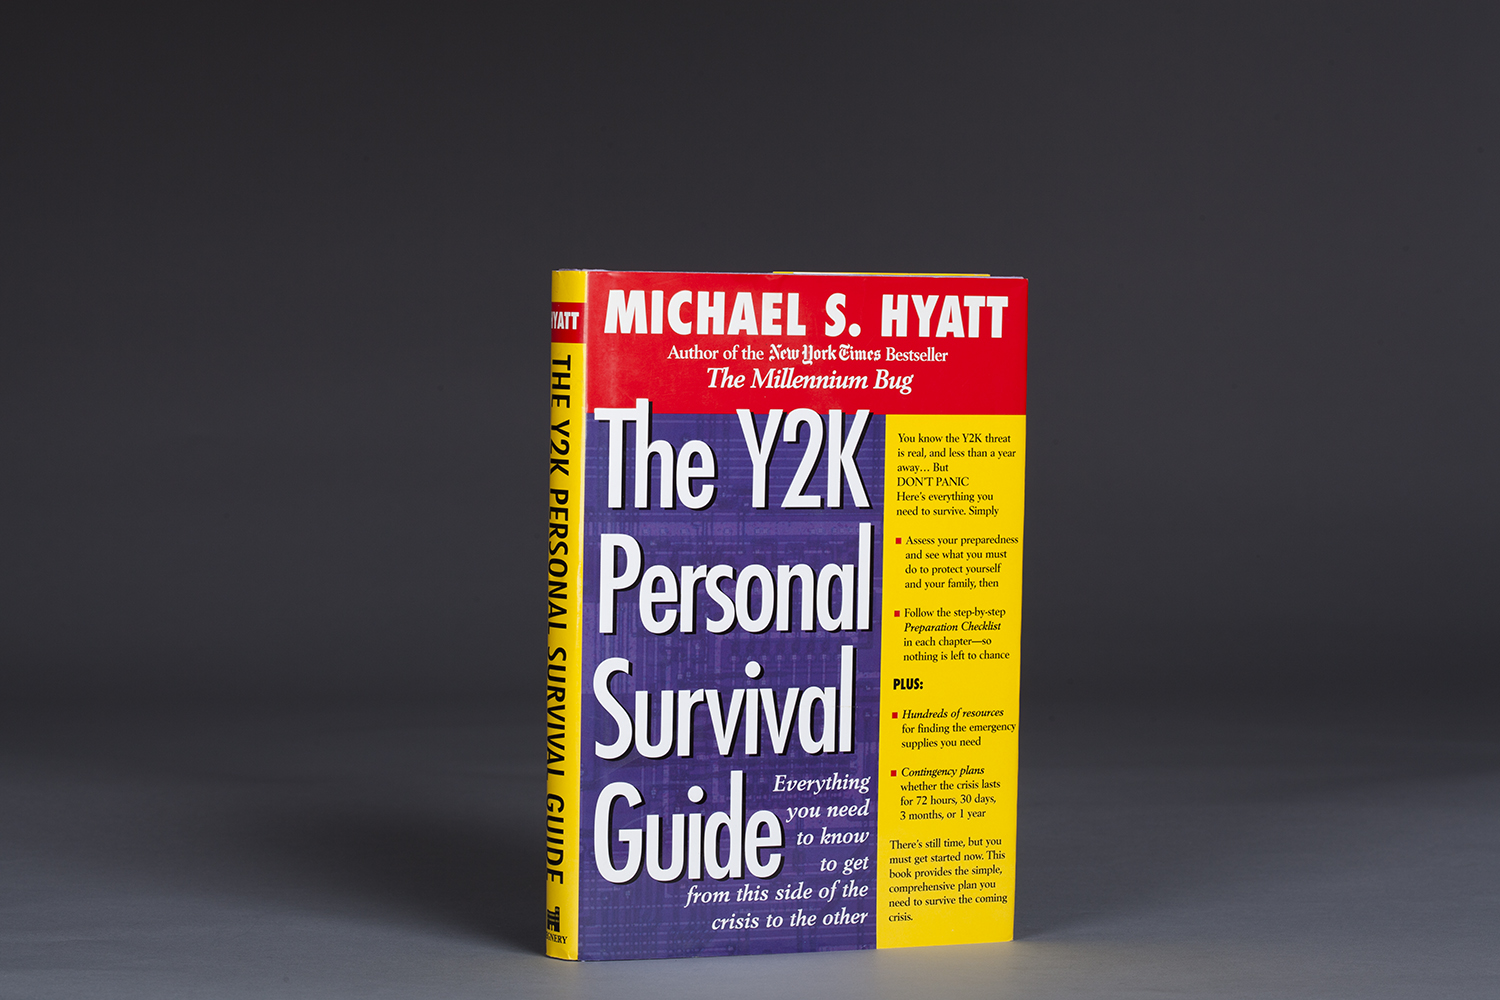 The Y2K Personal Survival Guide - 9764 Cover.jpg